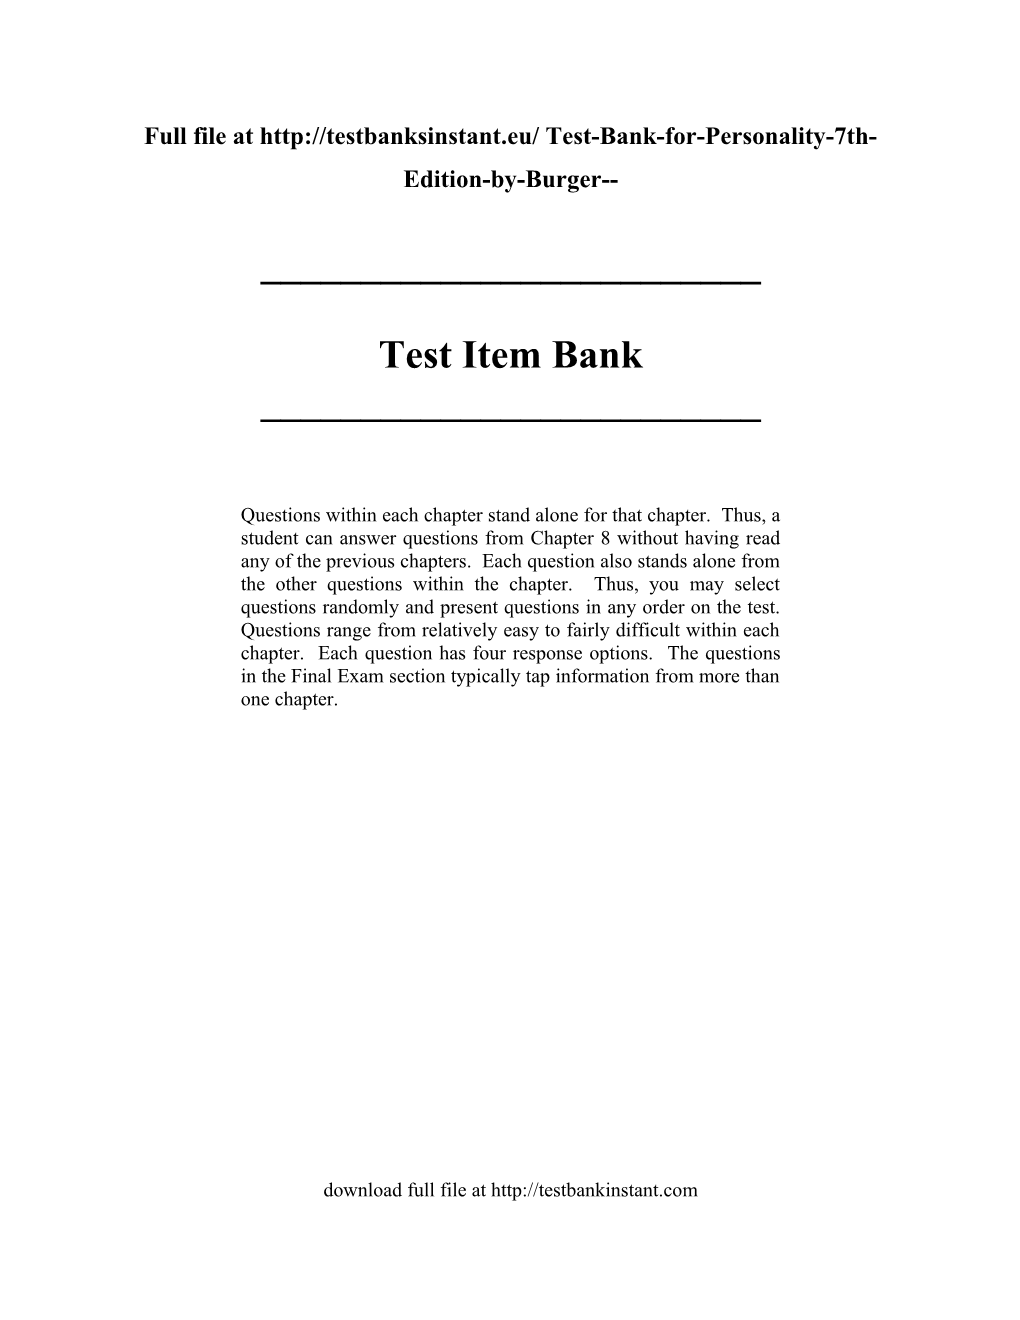 Full File at Test-Bank-For-Personality-7Th-Edition-By-Burger